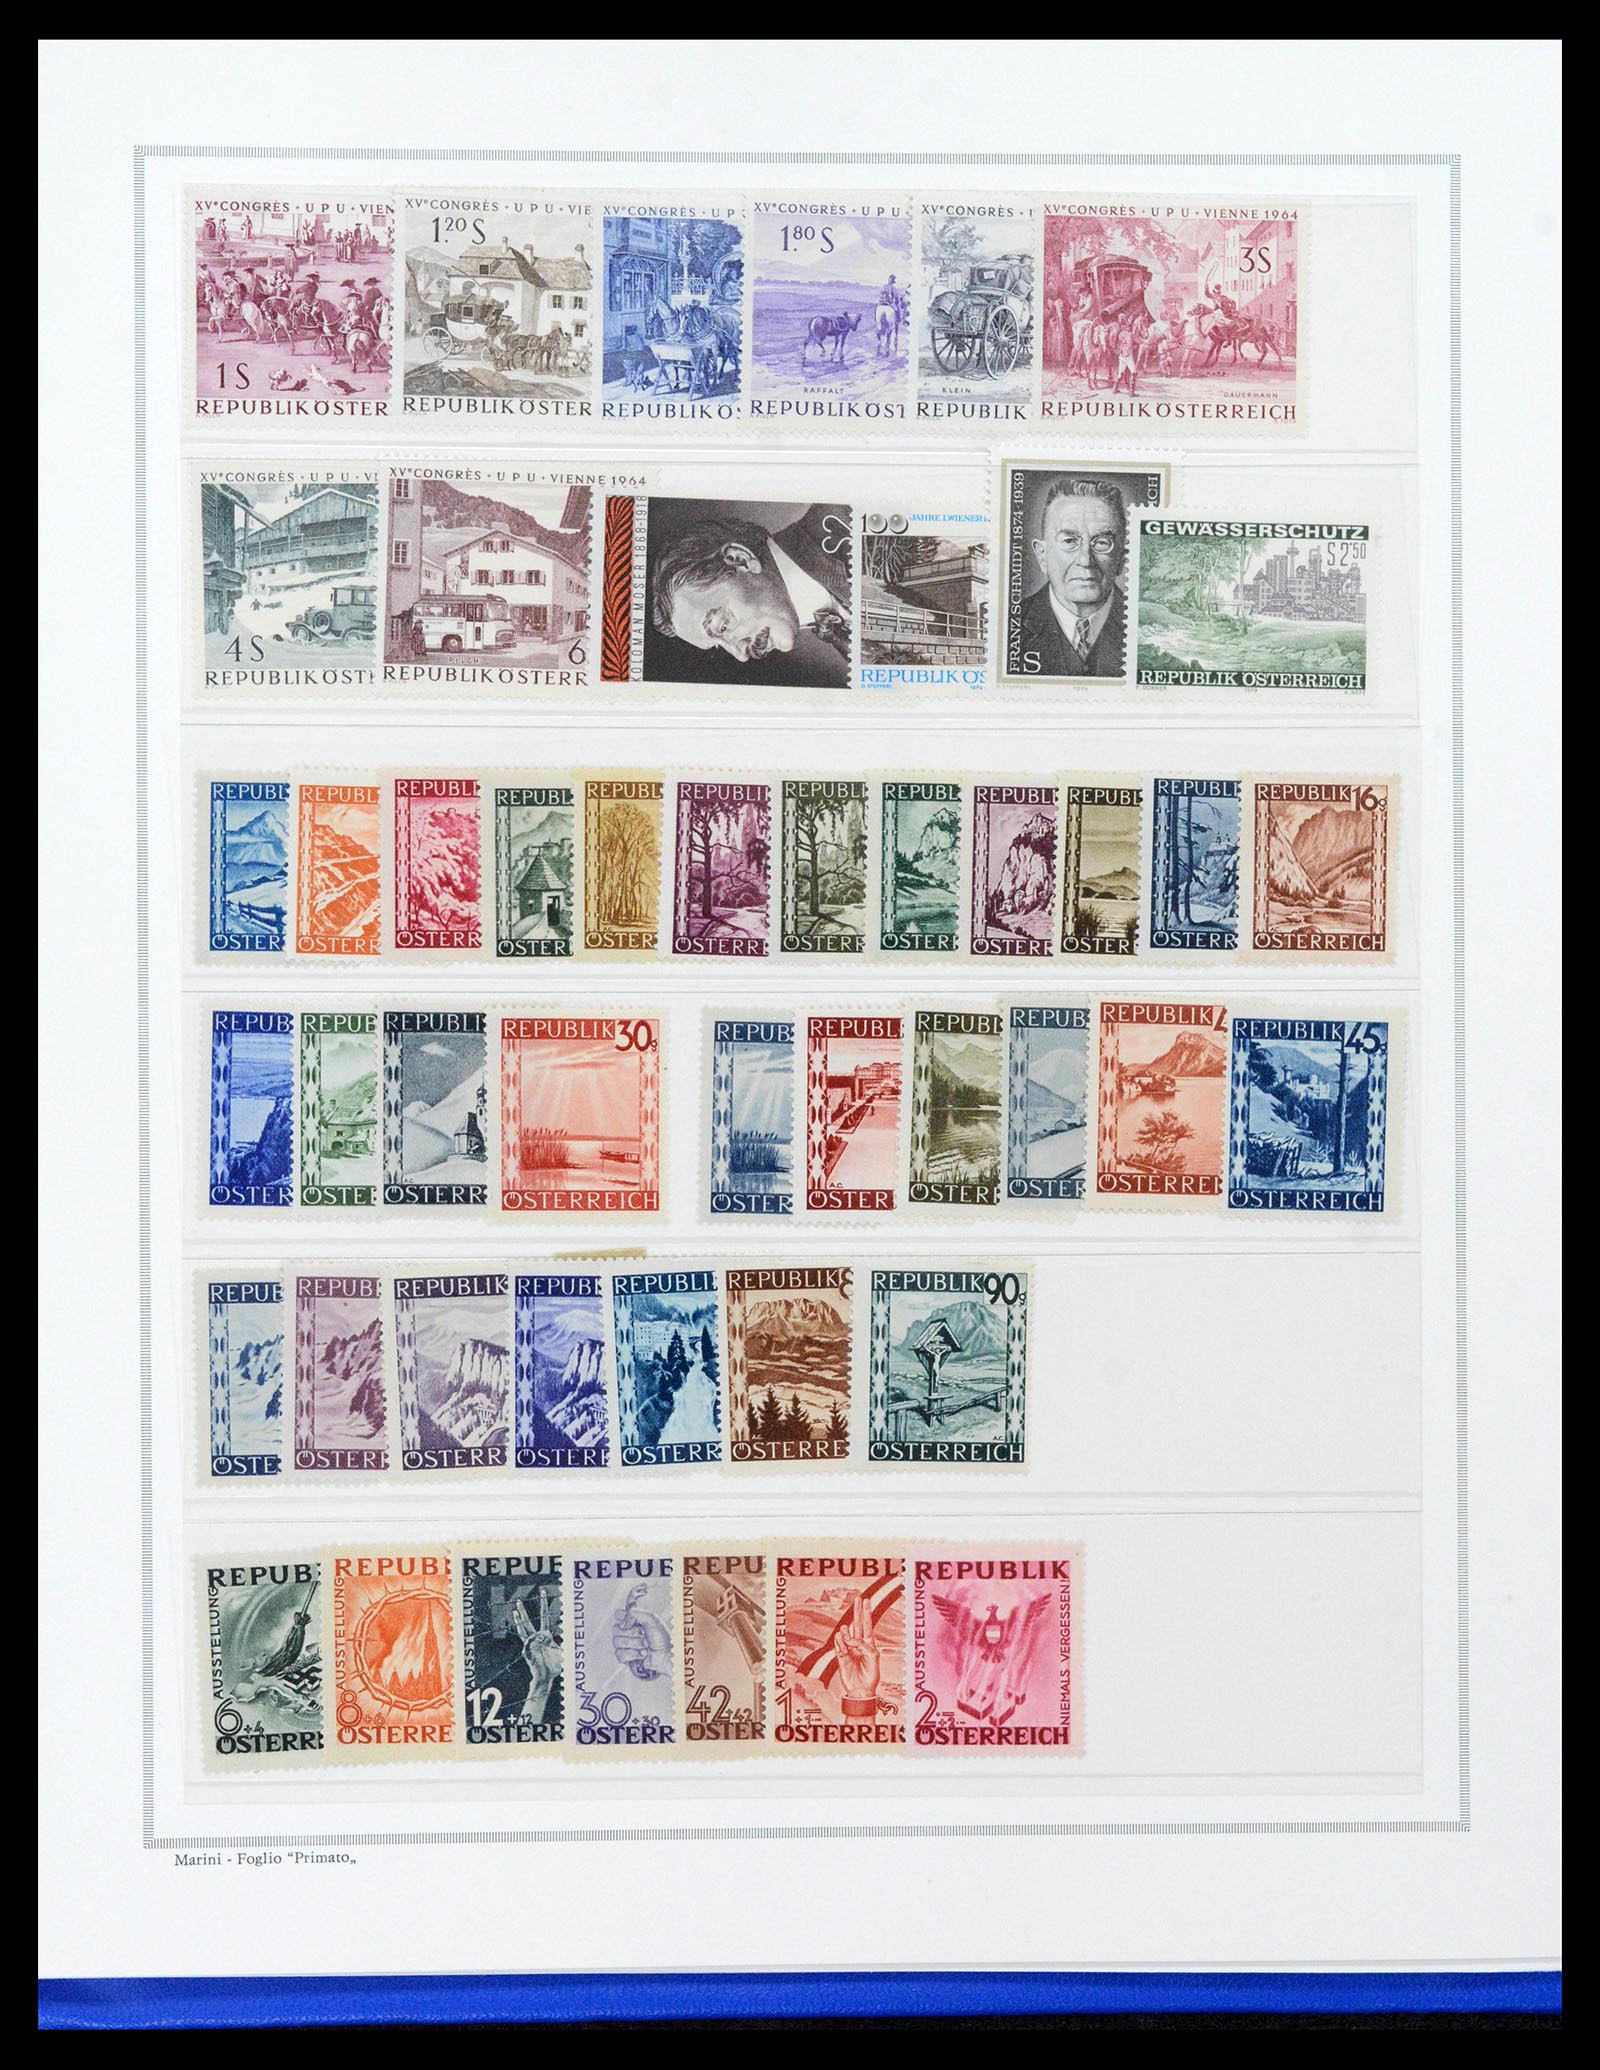 39038 0058 - Stamp collection 39038 Austria 1850-1950.